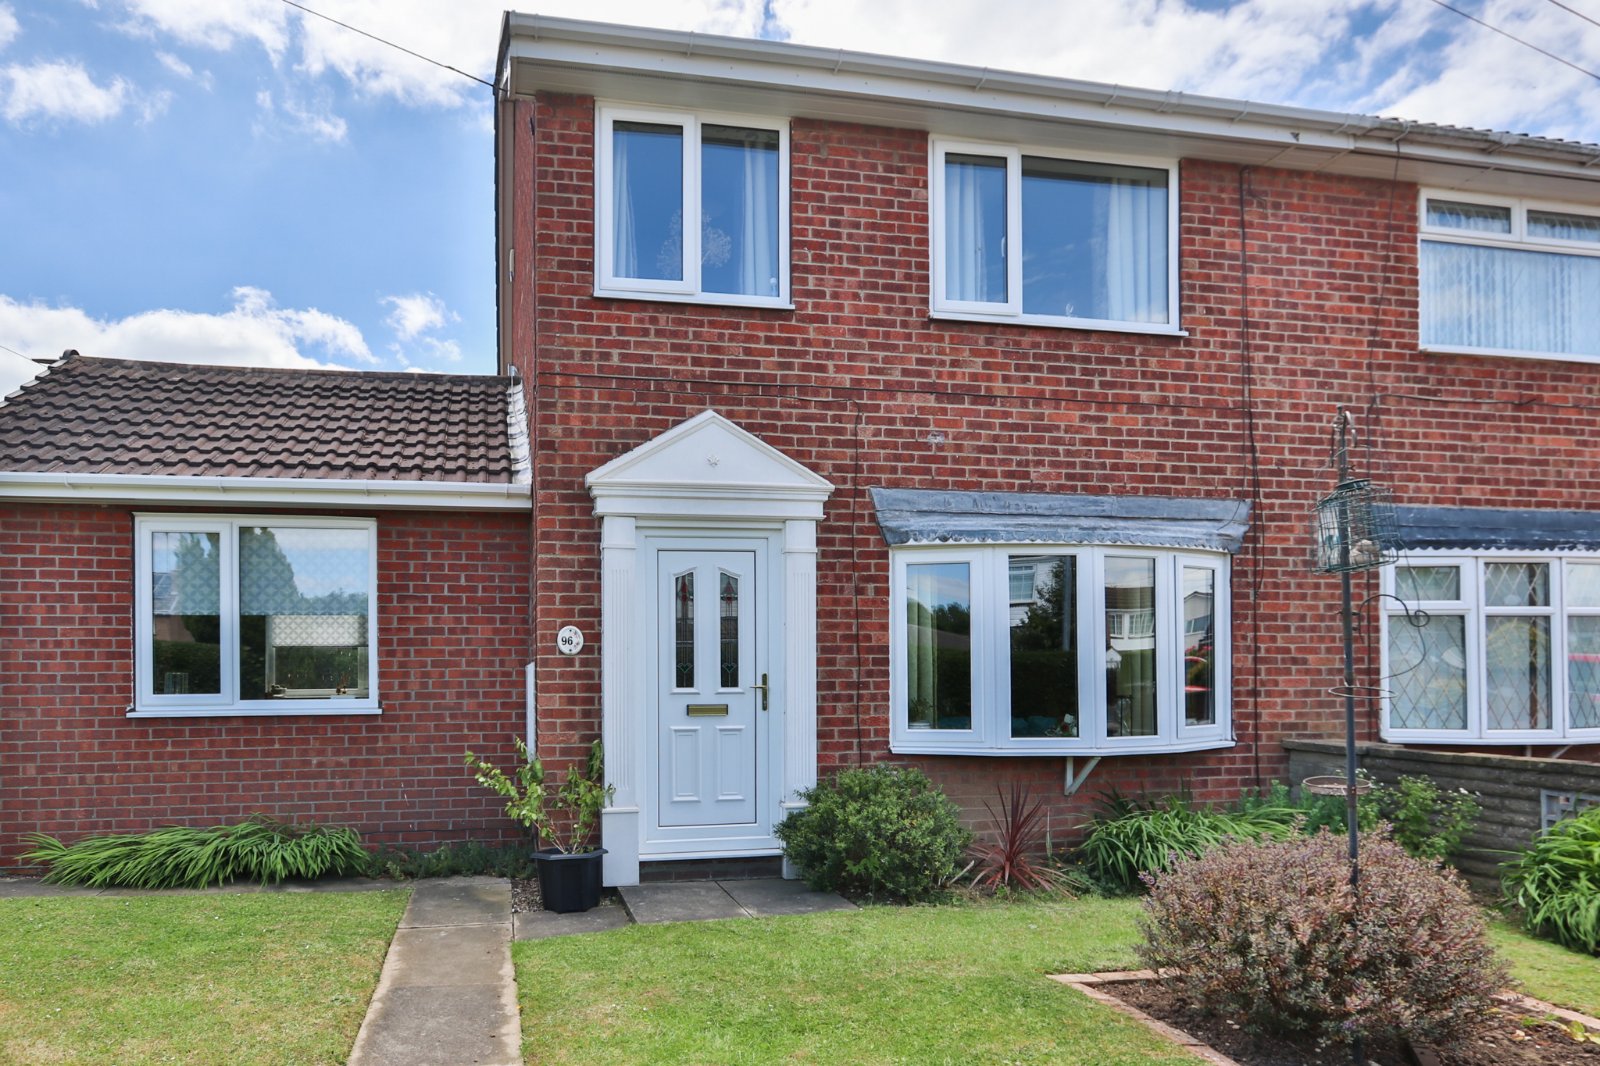 3 bed house for sale in Willowdale, Hull, HU7 